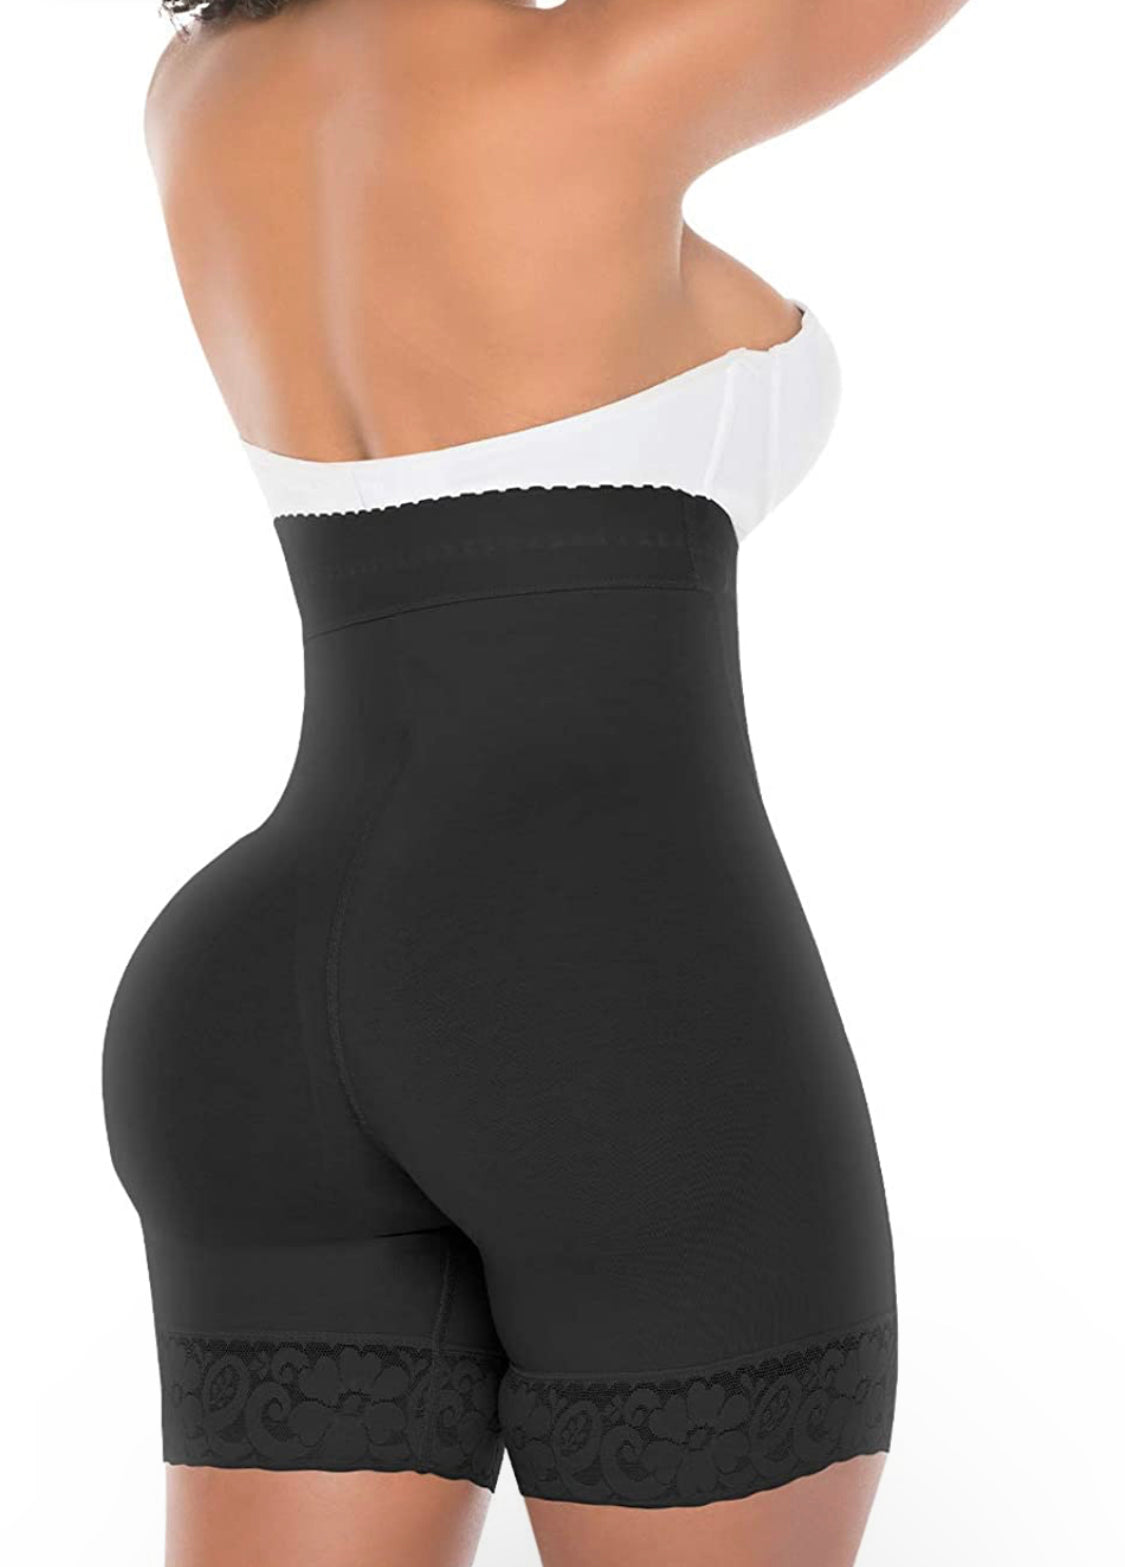 Strapless High Waist Compression Shapewear Tummy Control Colombians